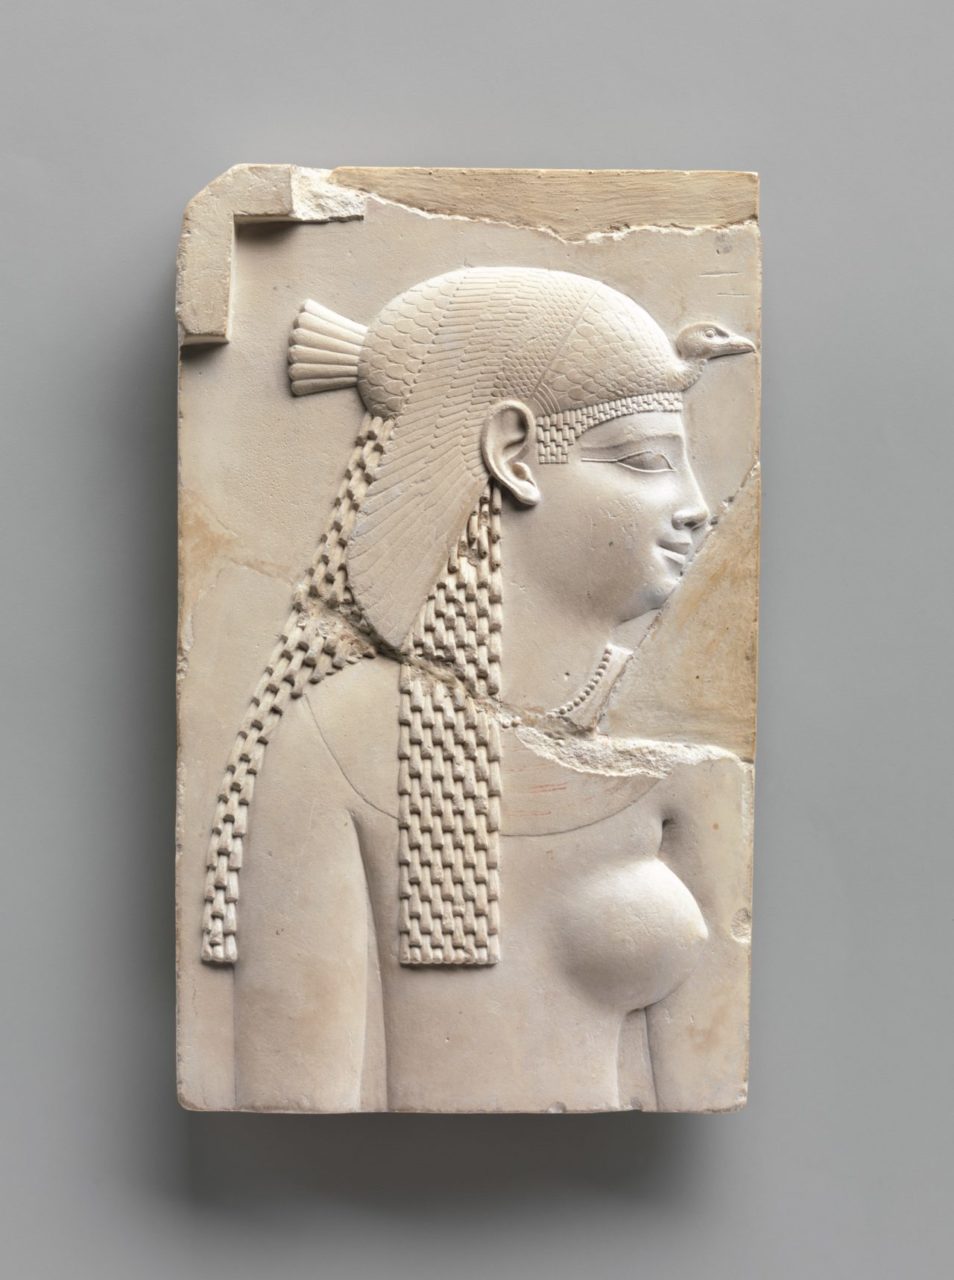 Plaque Depicting a Goddess or Queen, and on Opposite Side a King